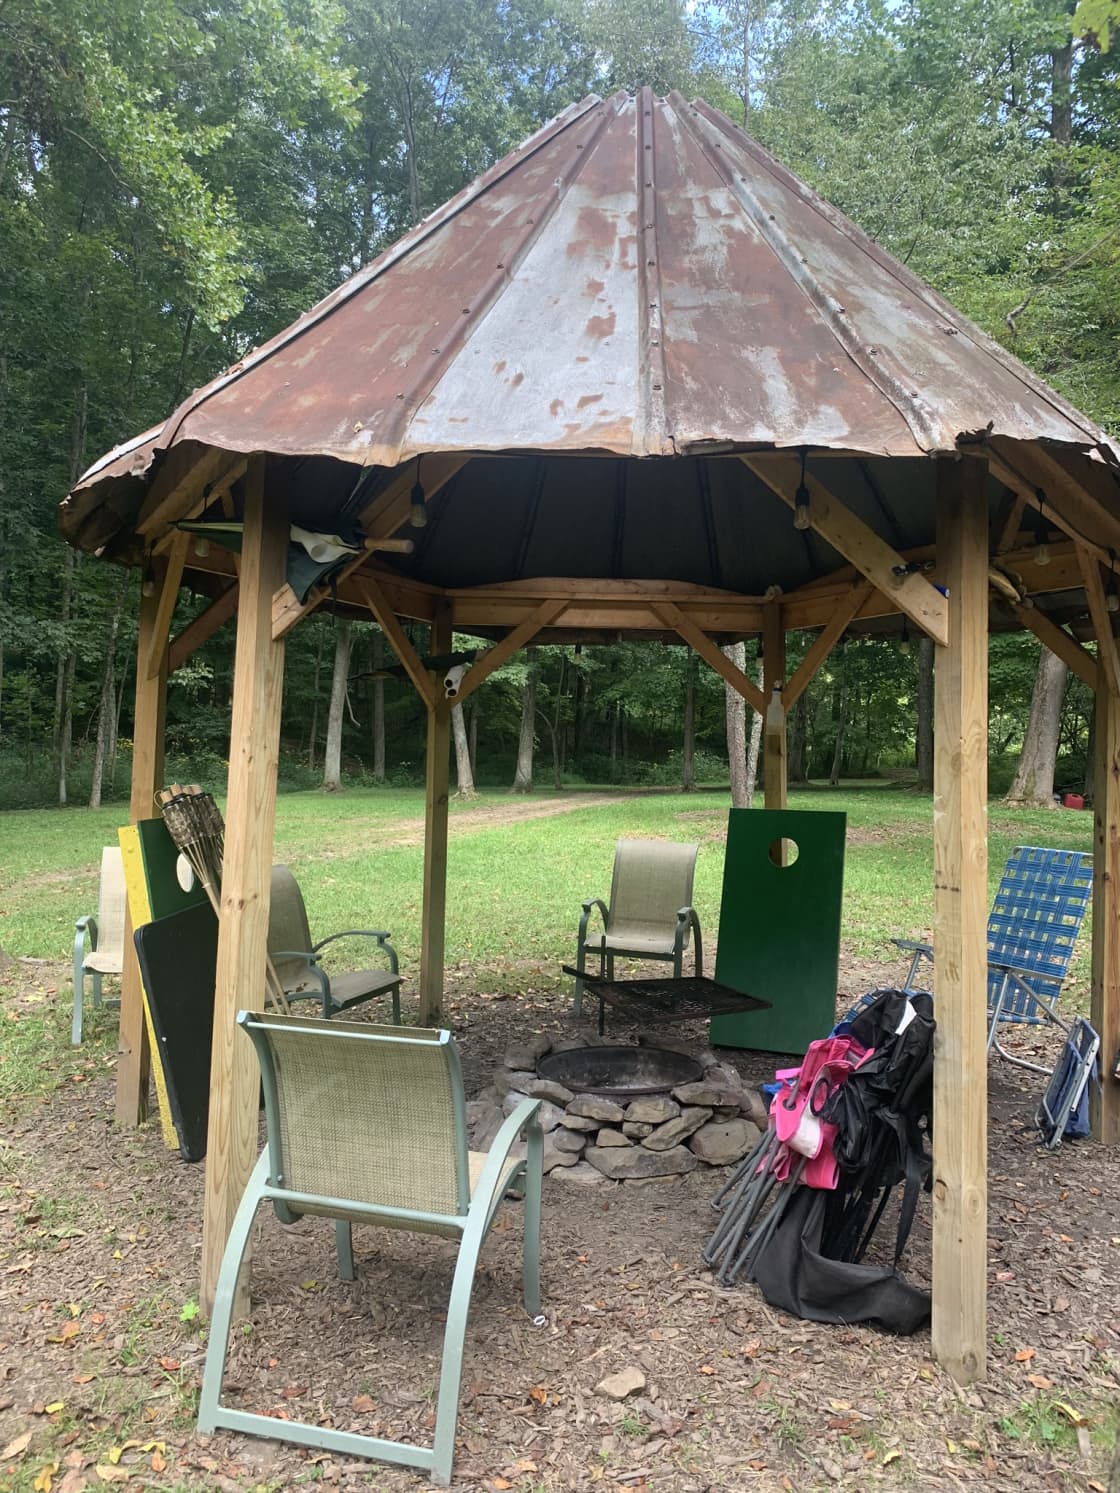 The Turkey Hollow Campground